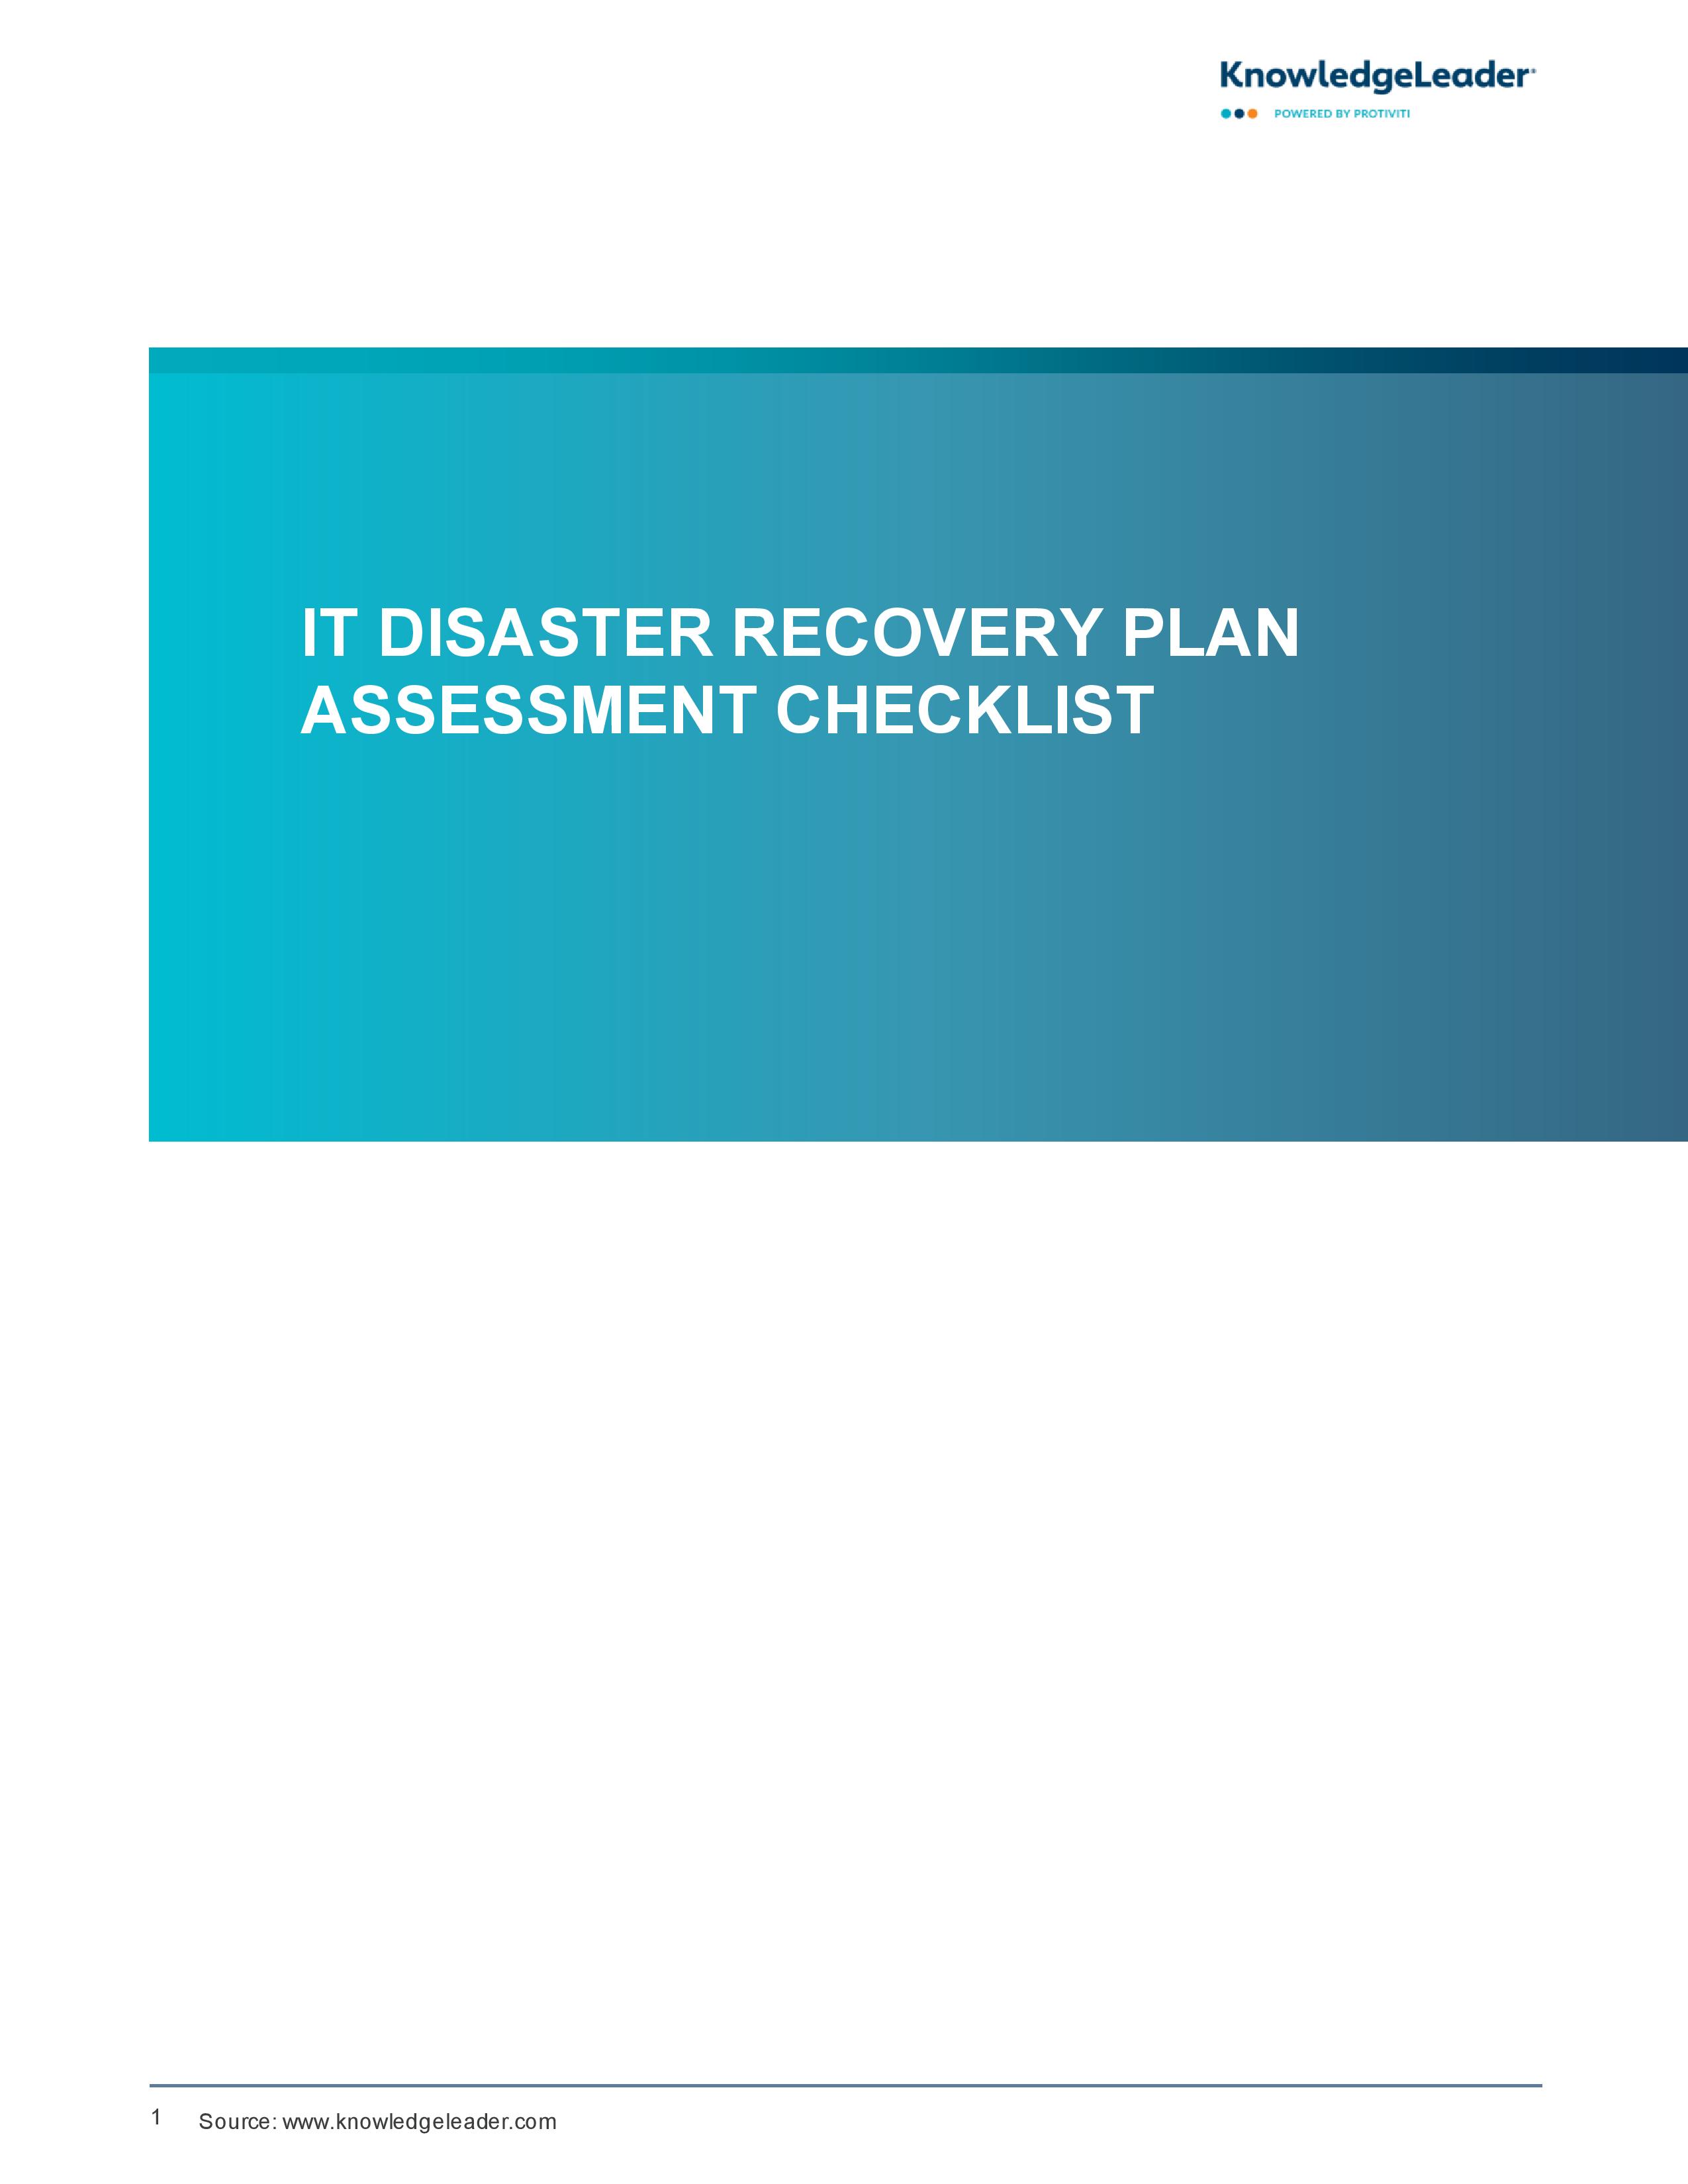 Screenshot of the first page of IT Disaster Recovery Plan Assessment Checklist